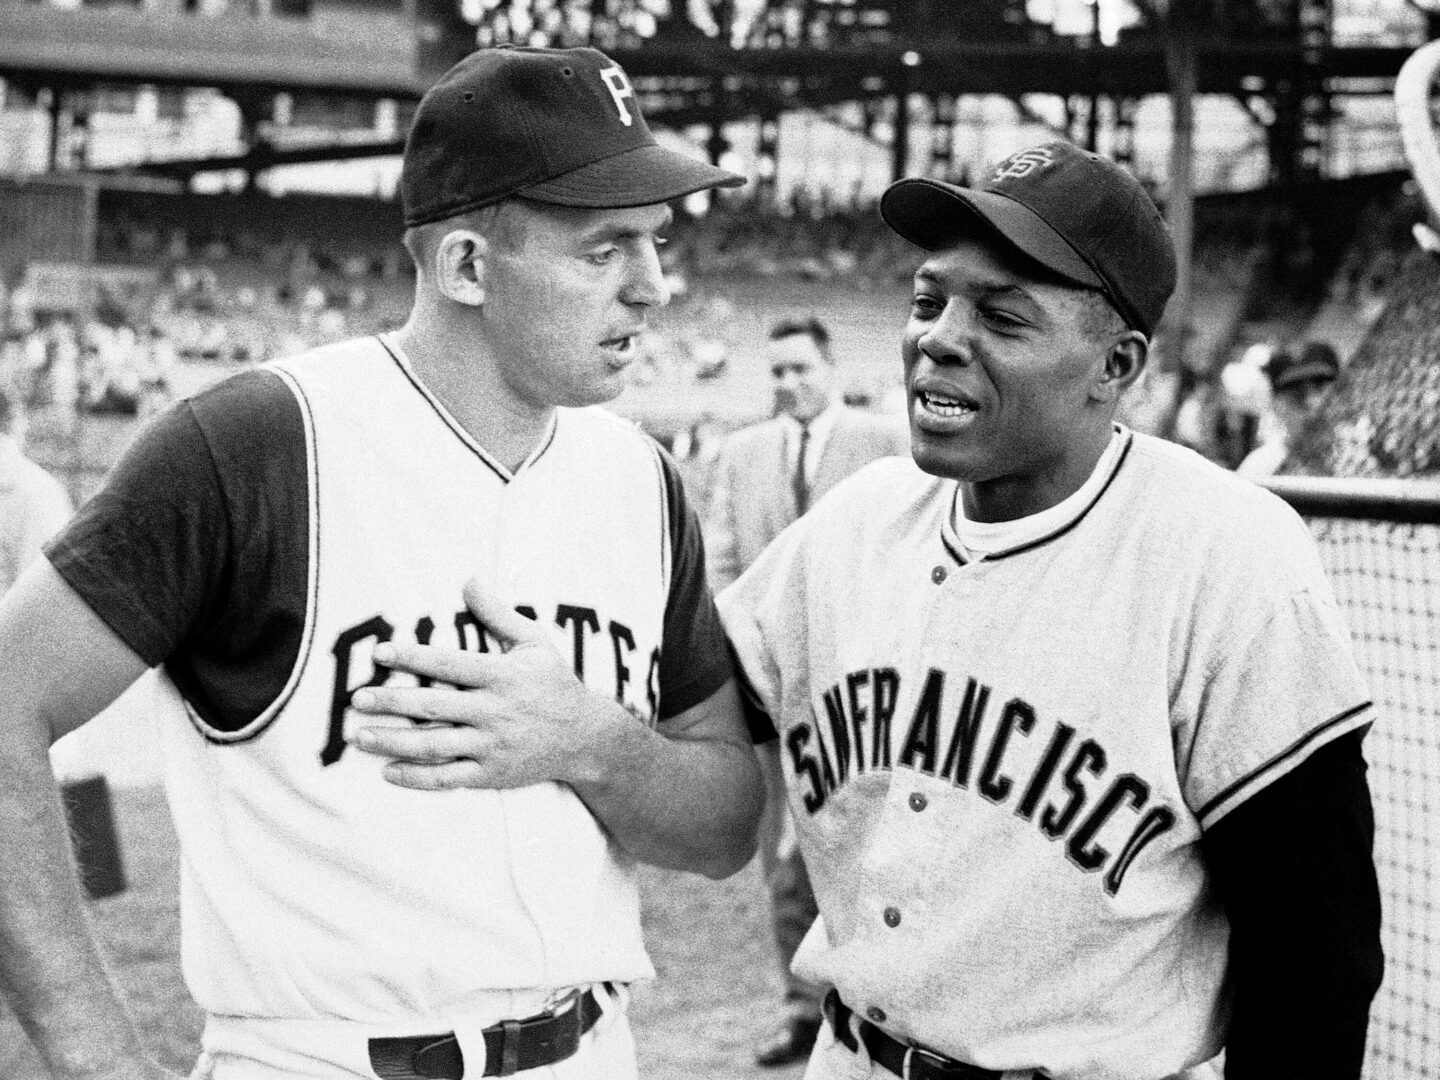 Frank Thomas, star with the Pittsburgh Pirates and original 1962